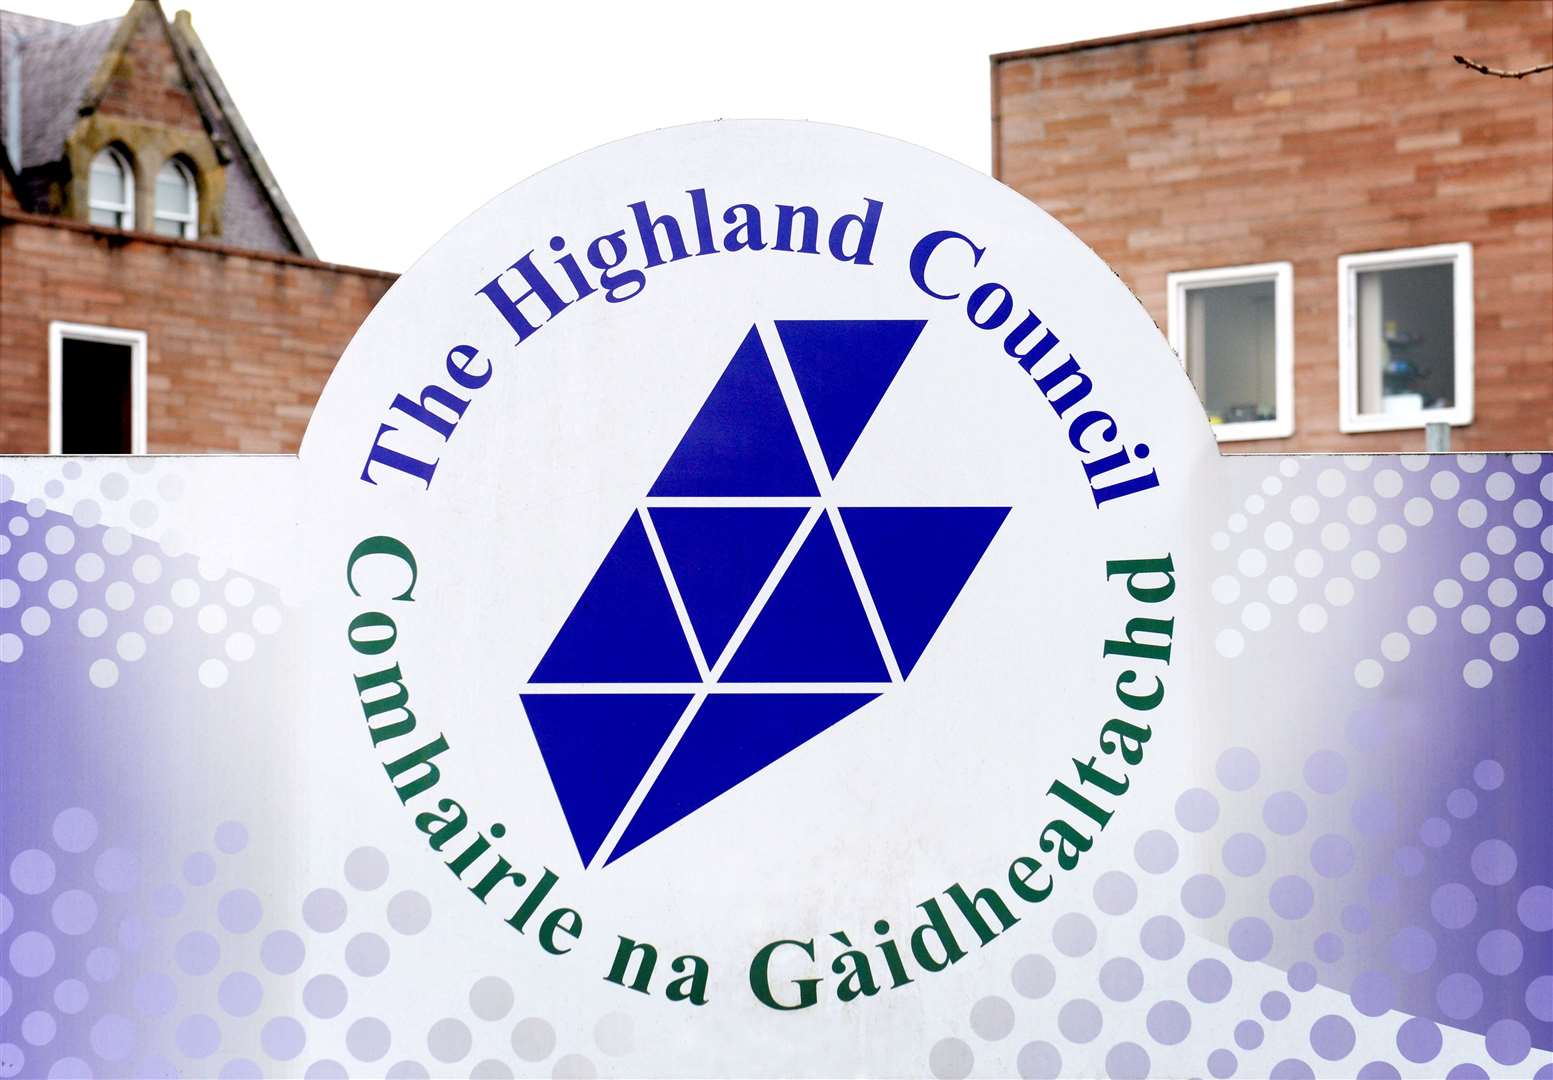 The Highland Council logo outside the local authority's Inverness HQ.